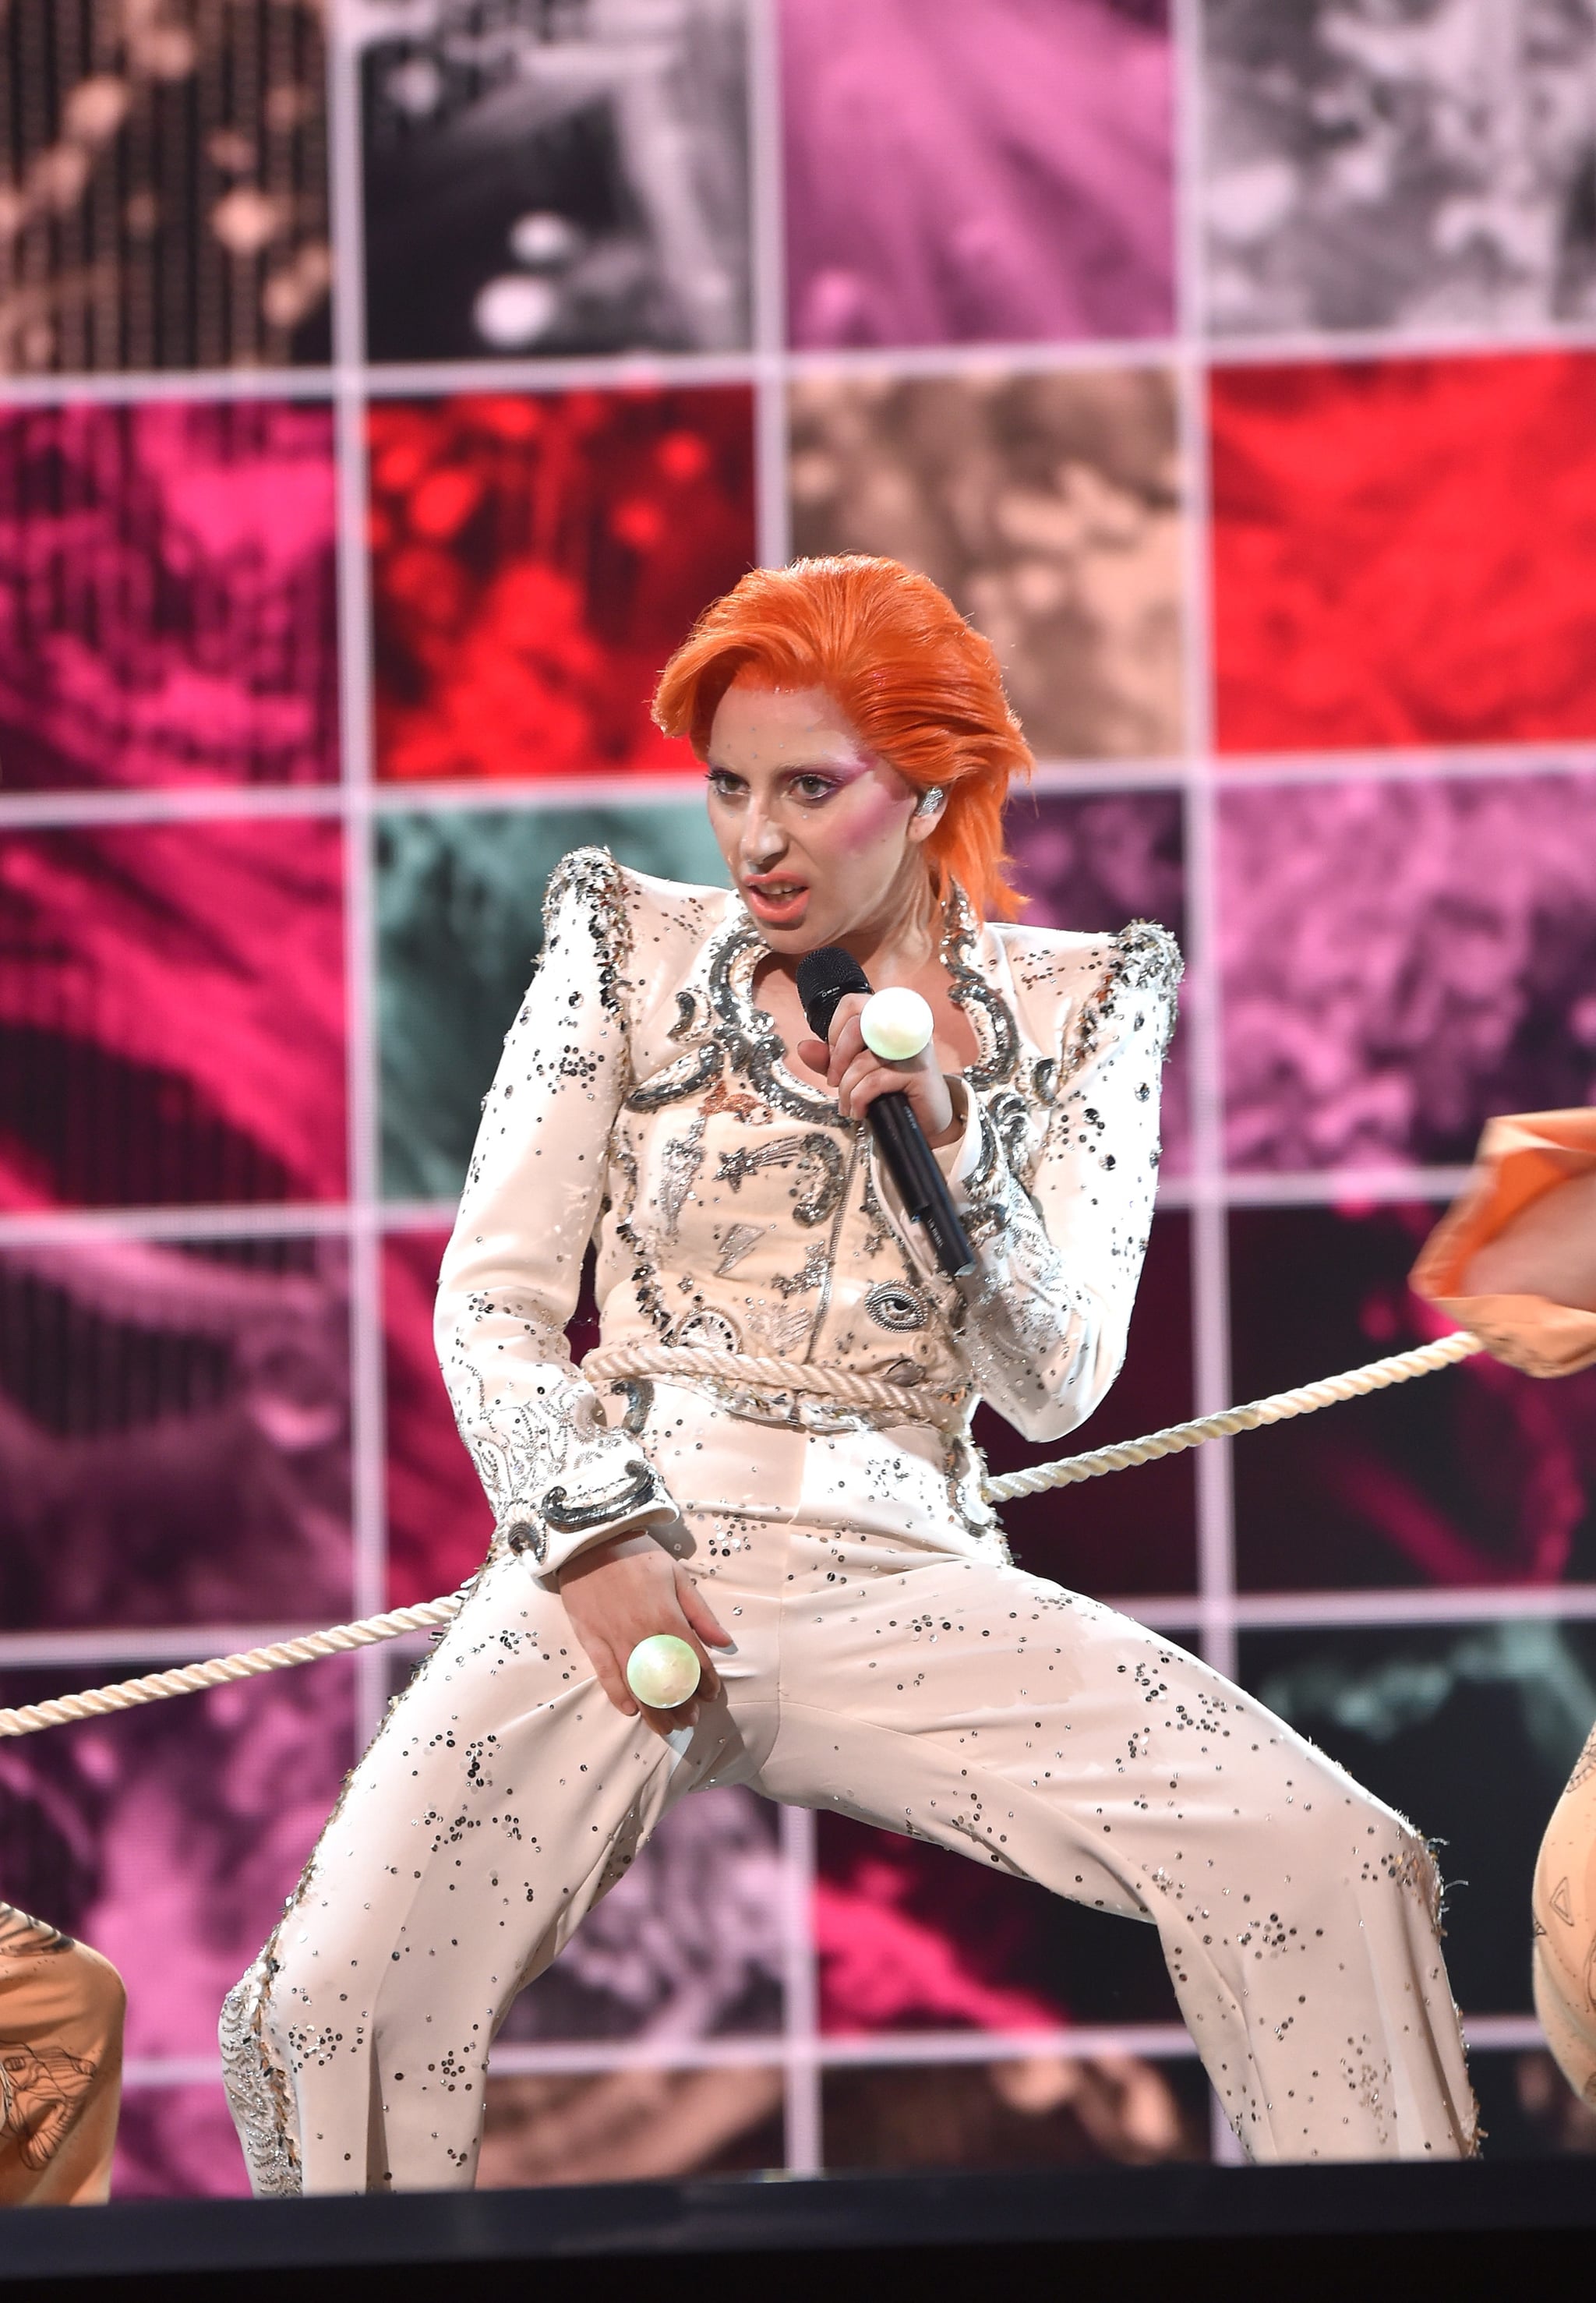 In 2016, Lady Gaga performed an onstage tribute to the late David Bowie.